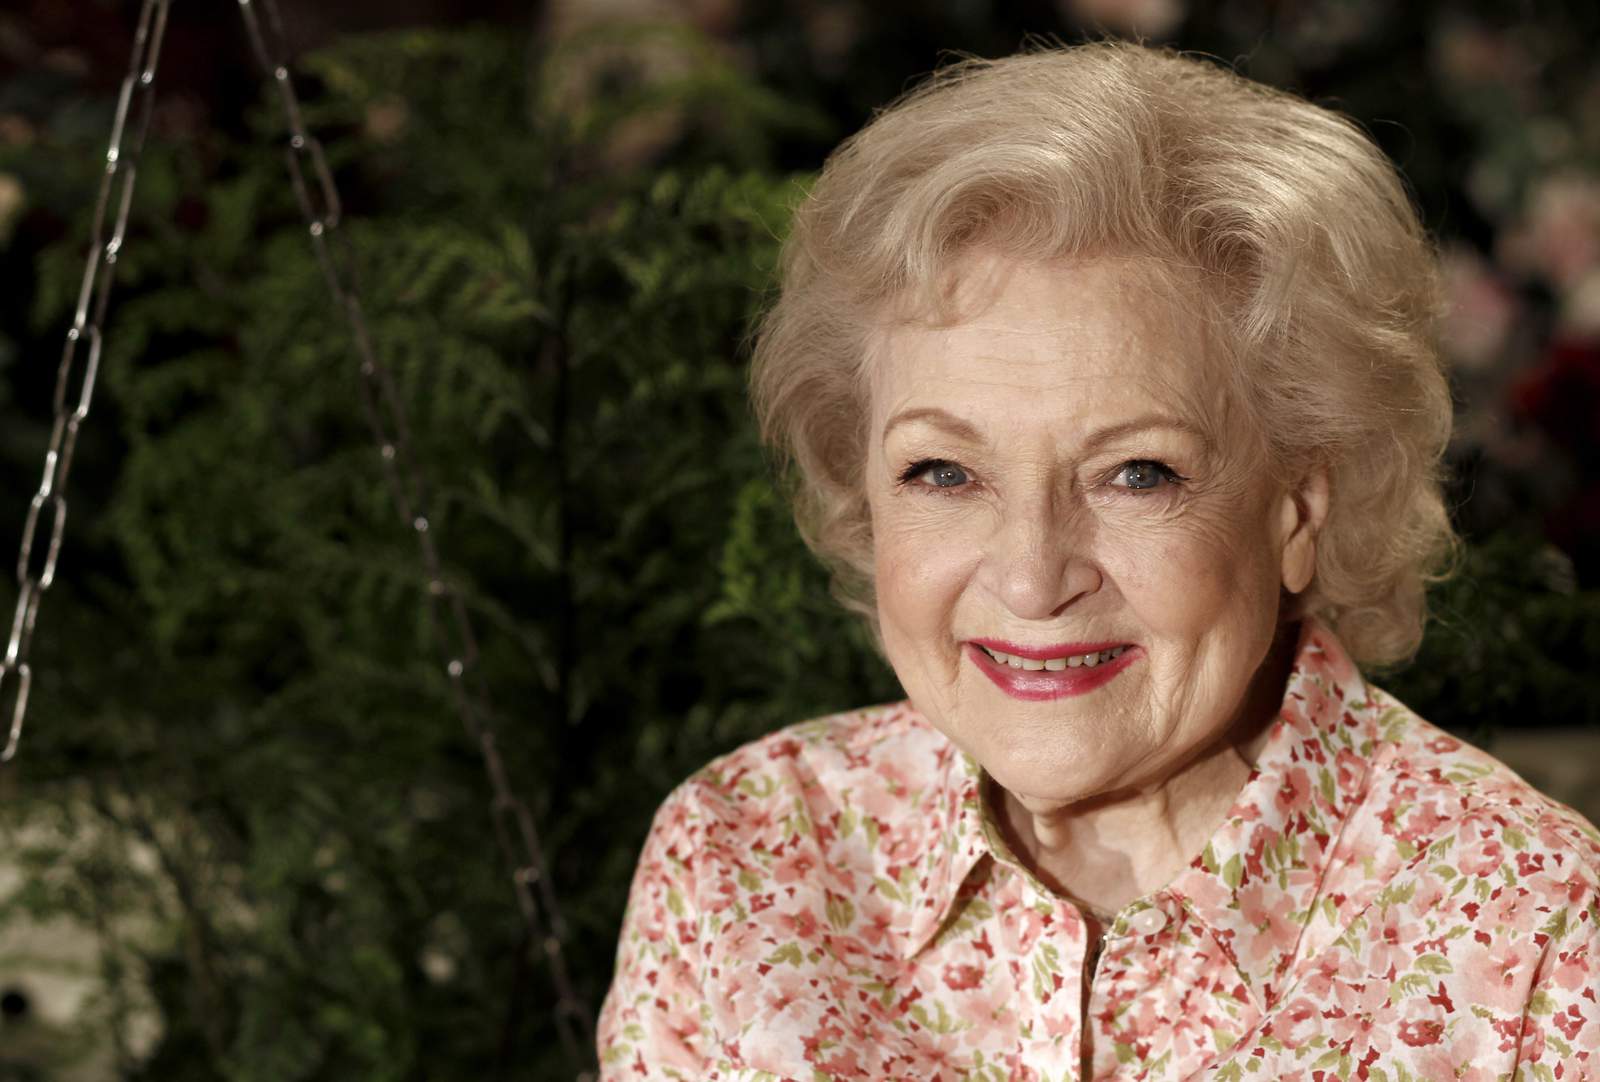 Texas zoo pays tribute to Betty White on her 99th birthday